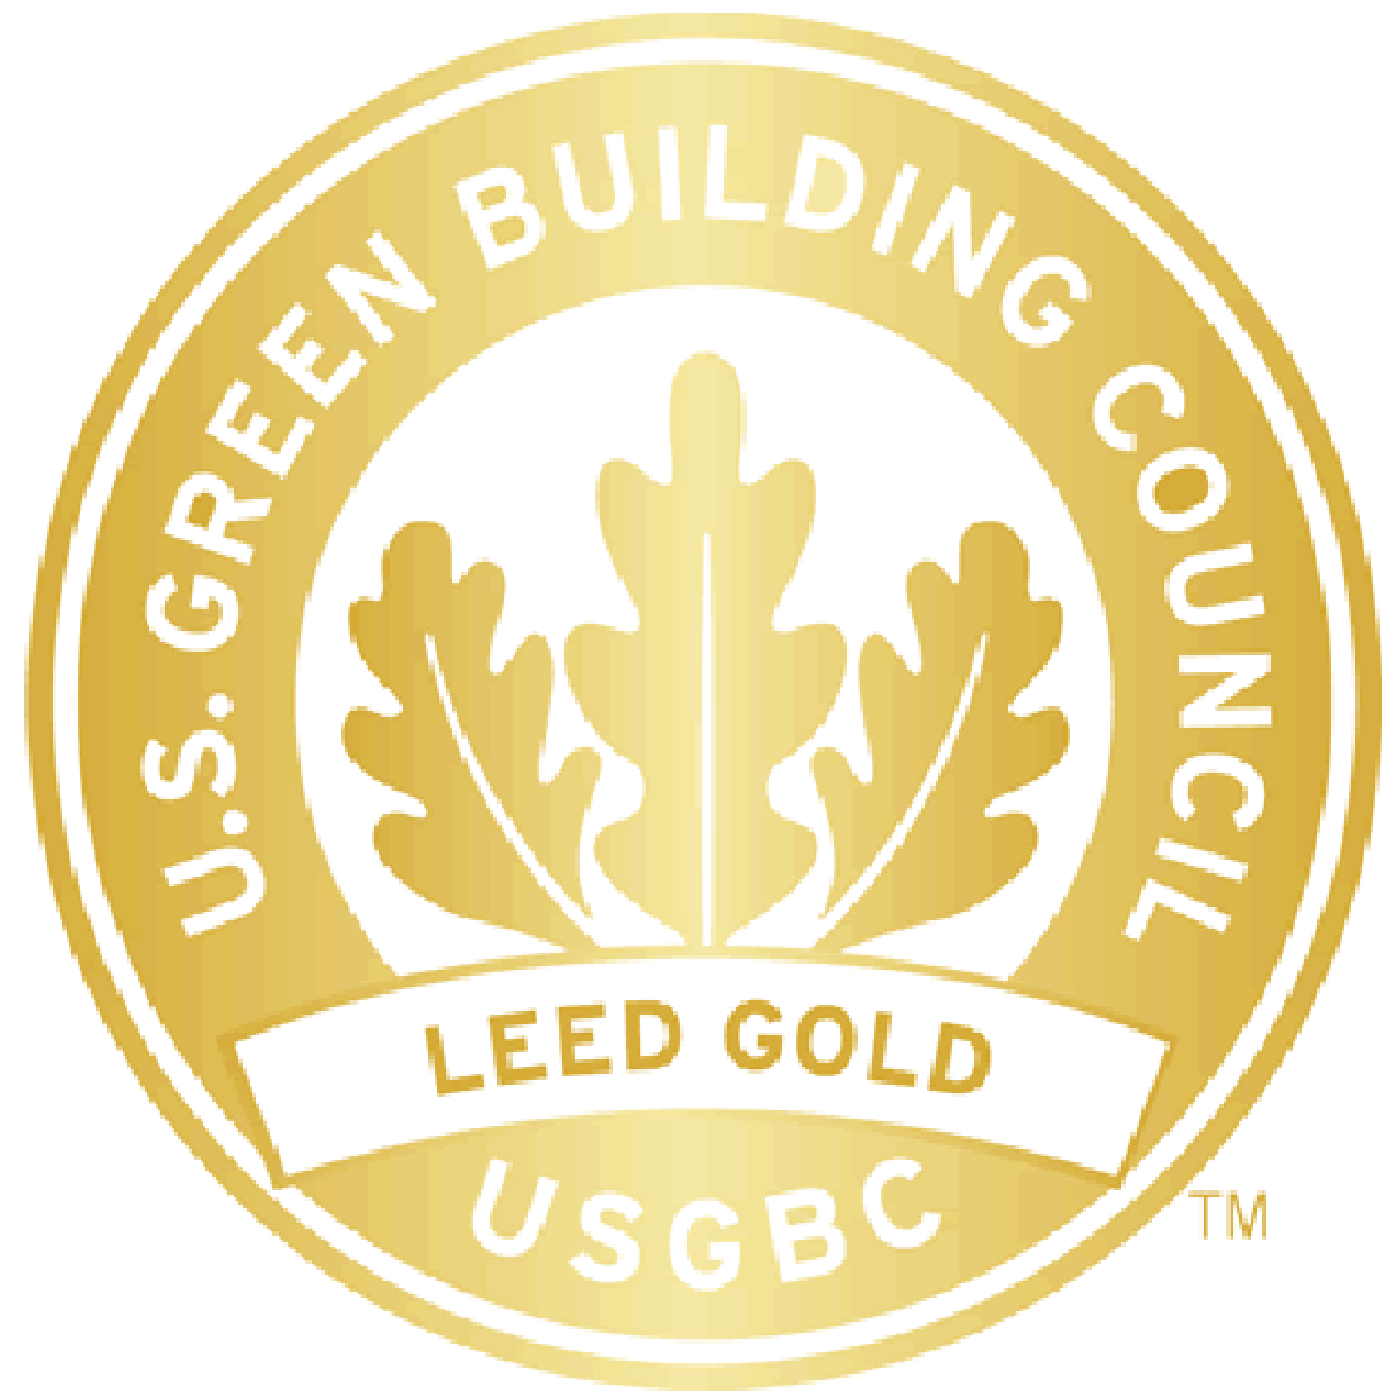 LEED Gold Certified logo: LEED (Leadership in Energy and Environmental Design) is a certification process that spreads environmental awareness to architects and contractors when constructing buildings. The design incorporates energy-efficient, water-conserving buildings with sustainable materials.  There are four levels in which projects can be rated:  Platinum (80+ points earned) Gold (60-79 points earned) Silver (50-59 points earned) Certified (40-49 points earned)